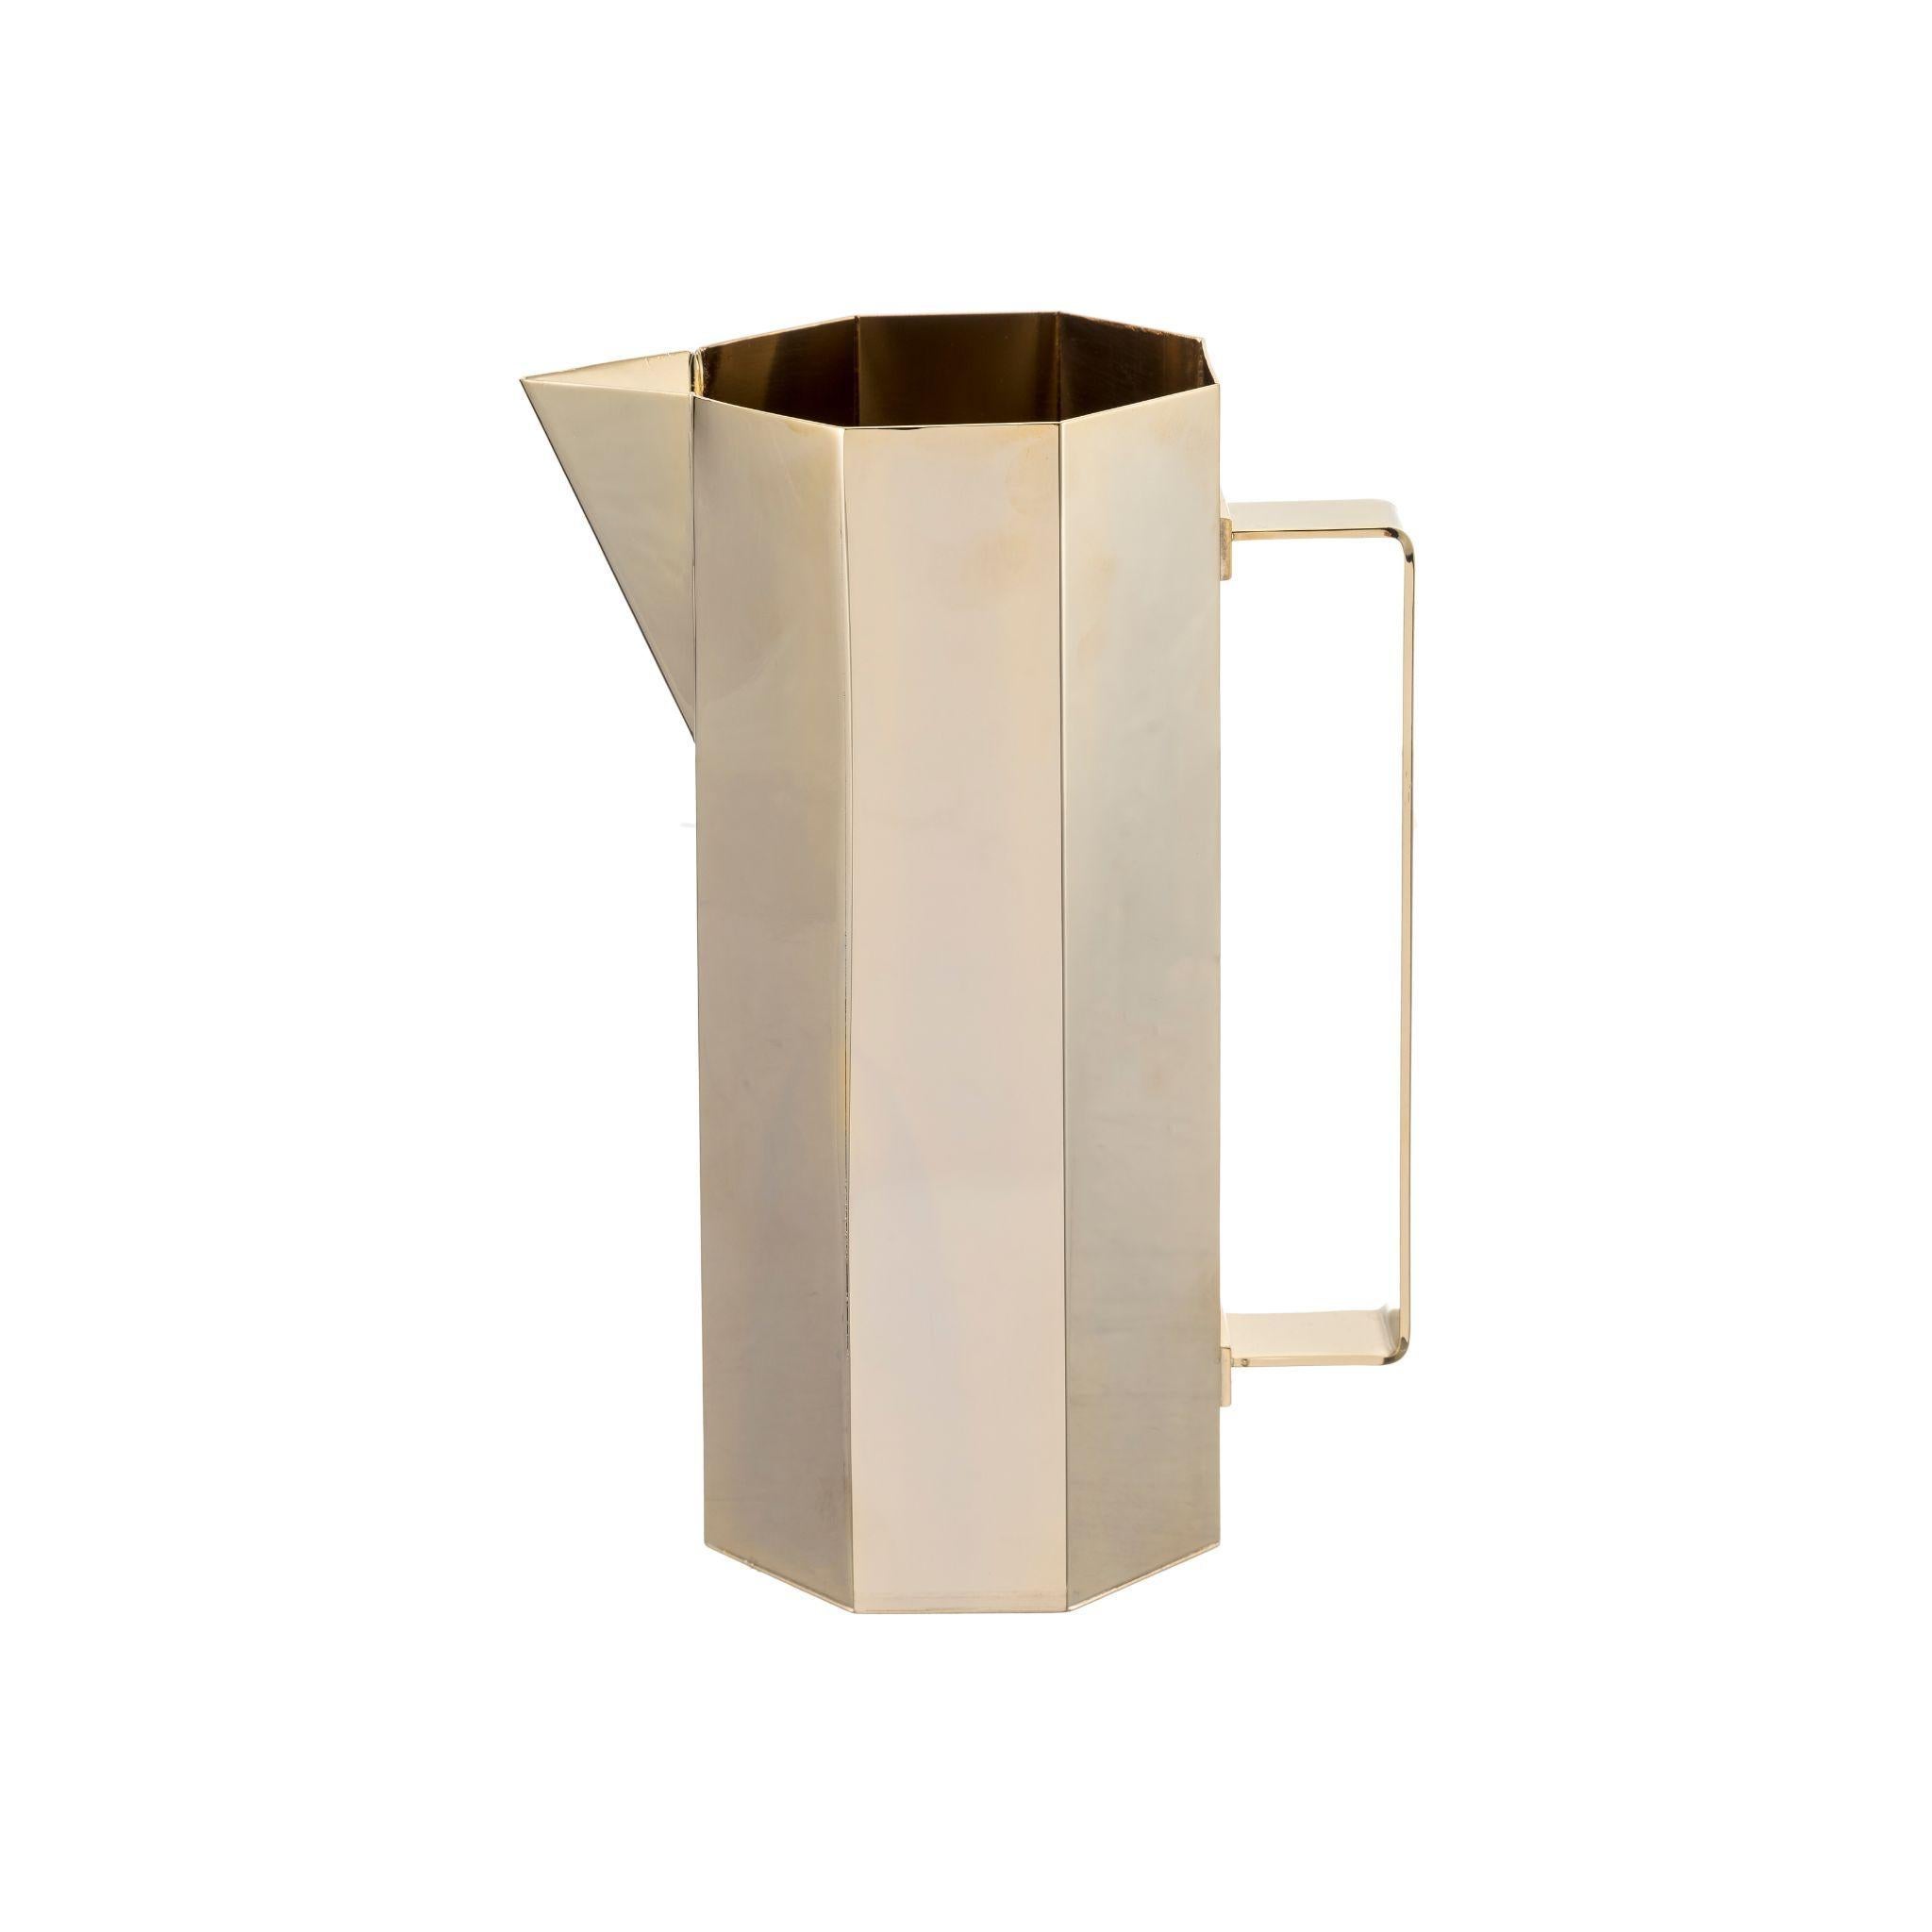 Elevate your table setting with our hexagonal classic brass jug. Made from high-quality brass and featuring a unique hexagonal shape, it adds sophistication to any decor. With a sturdy handle and spout for easy pouring, it is ideal for serving